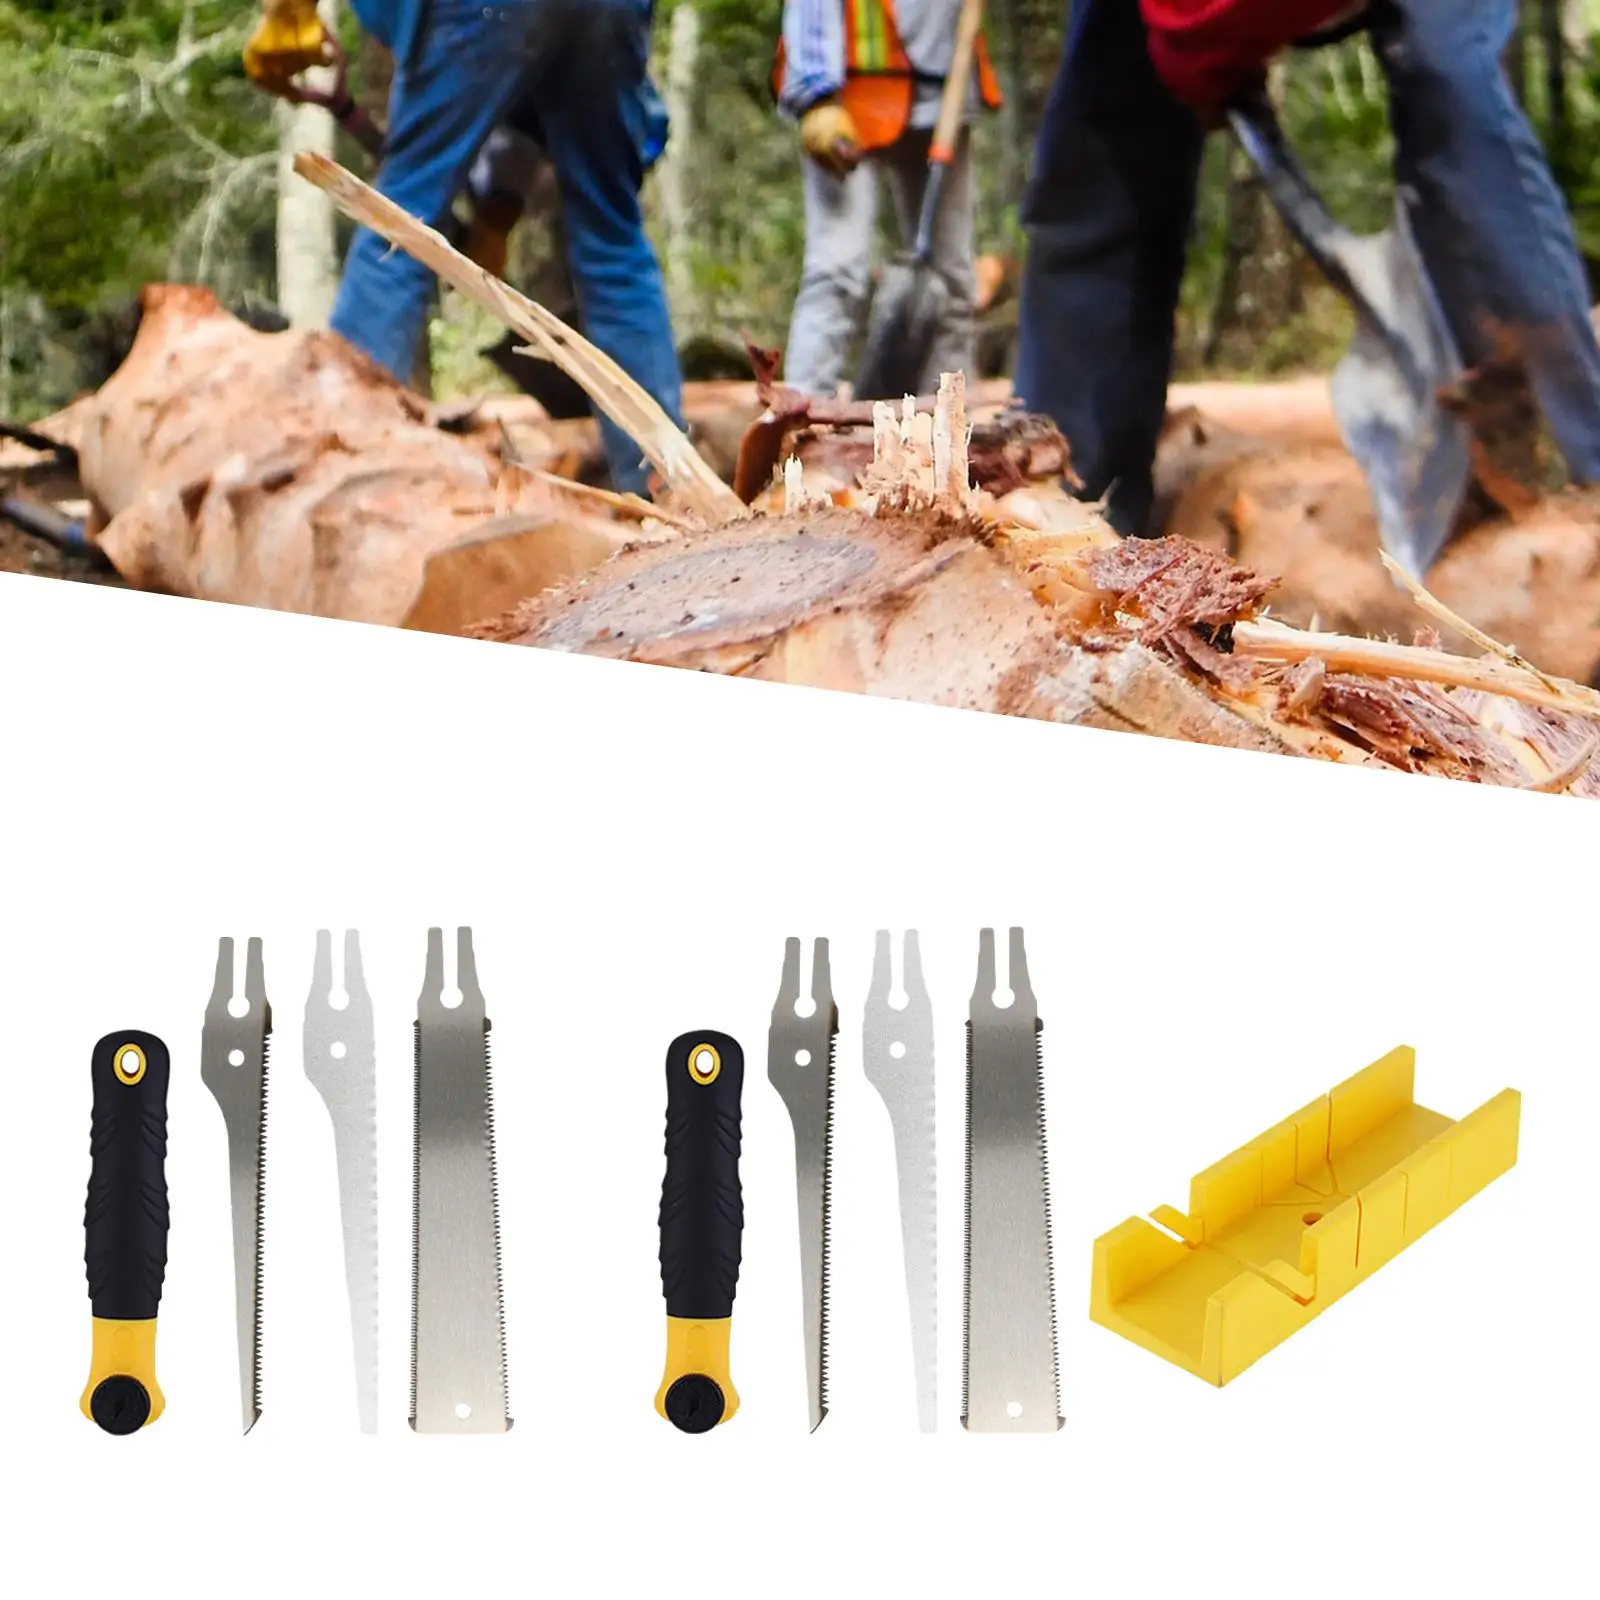 Manual Hand Saw Multifunctional Hand Tool Comfortable Handle Pruning Hand Saw for Gardening DIY Home Pruning Trees Outdoor